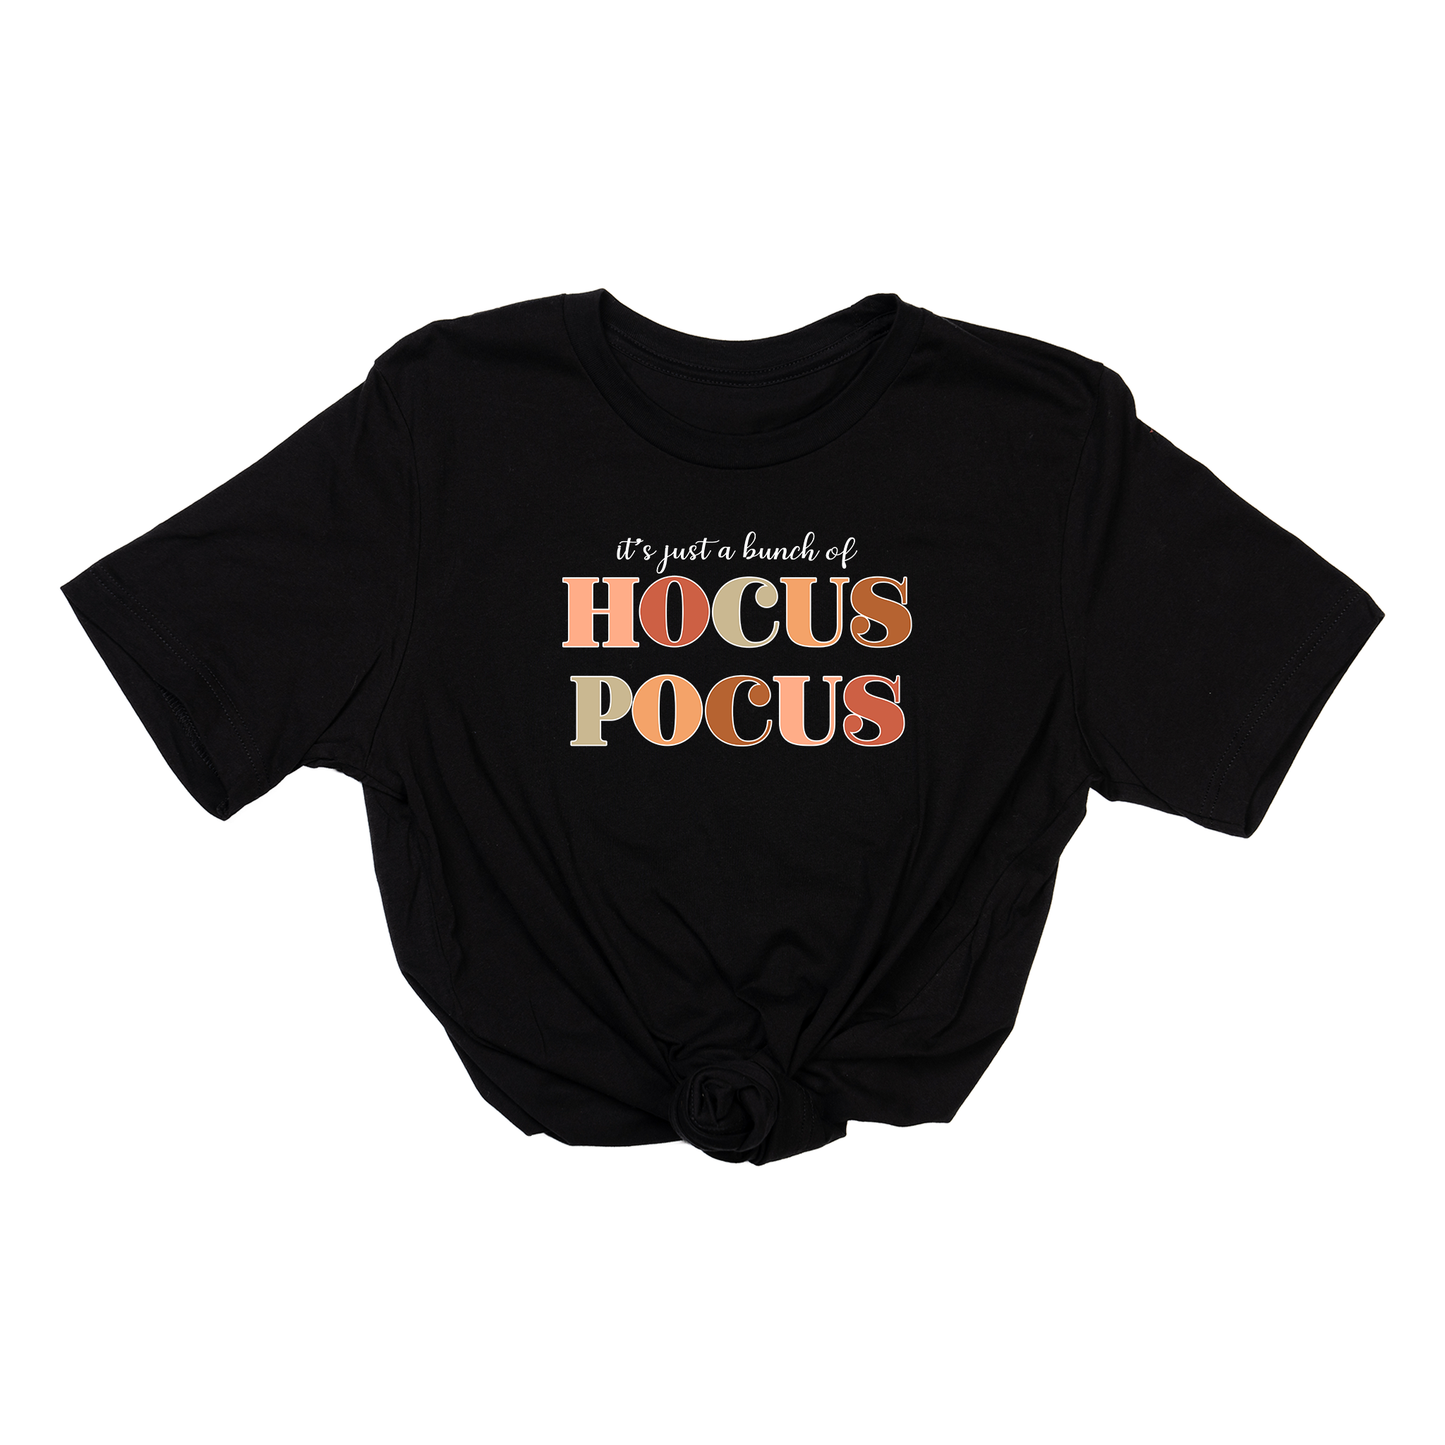 It's Just a Bunch of Hocus Pocus (White) - Tee (Black)